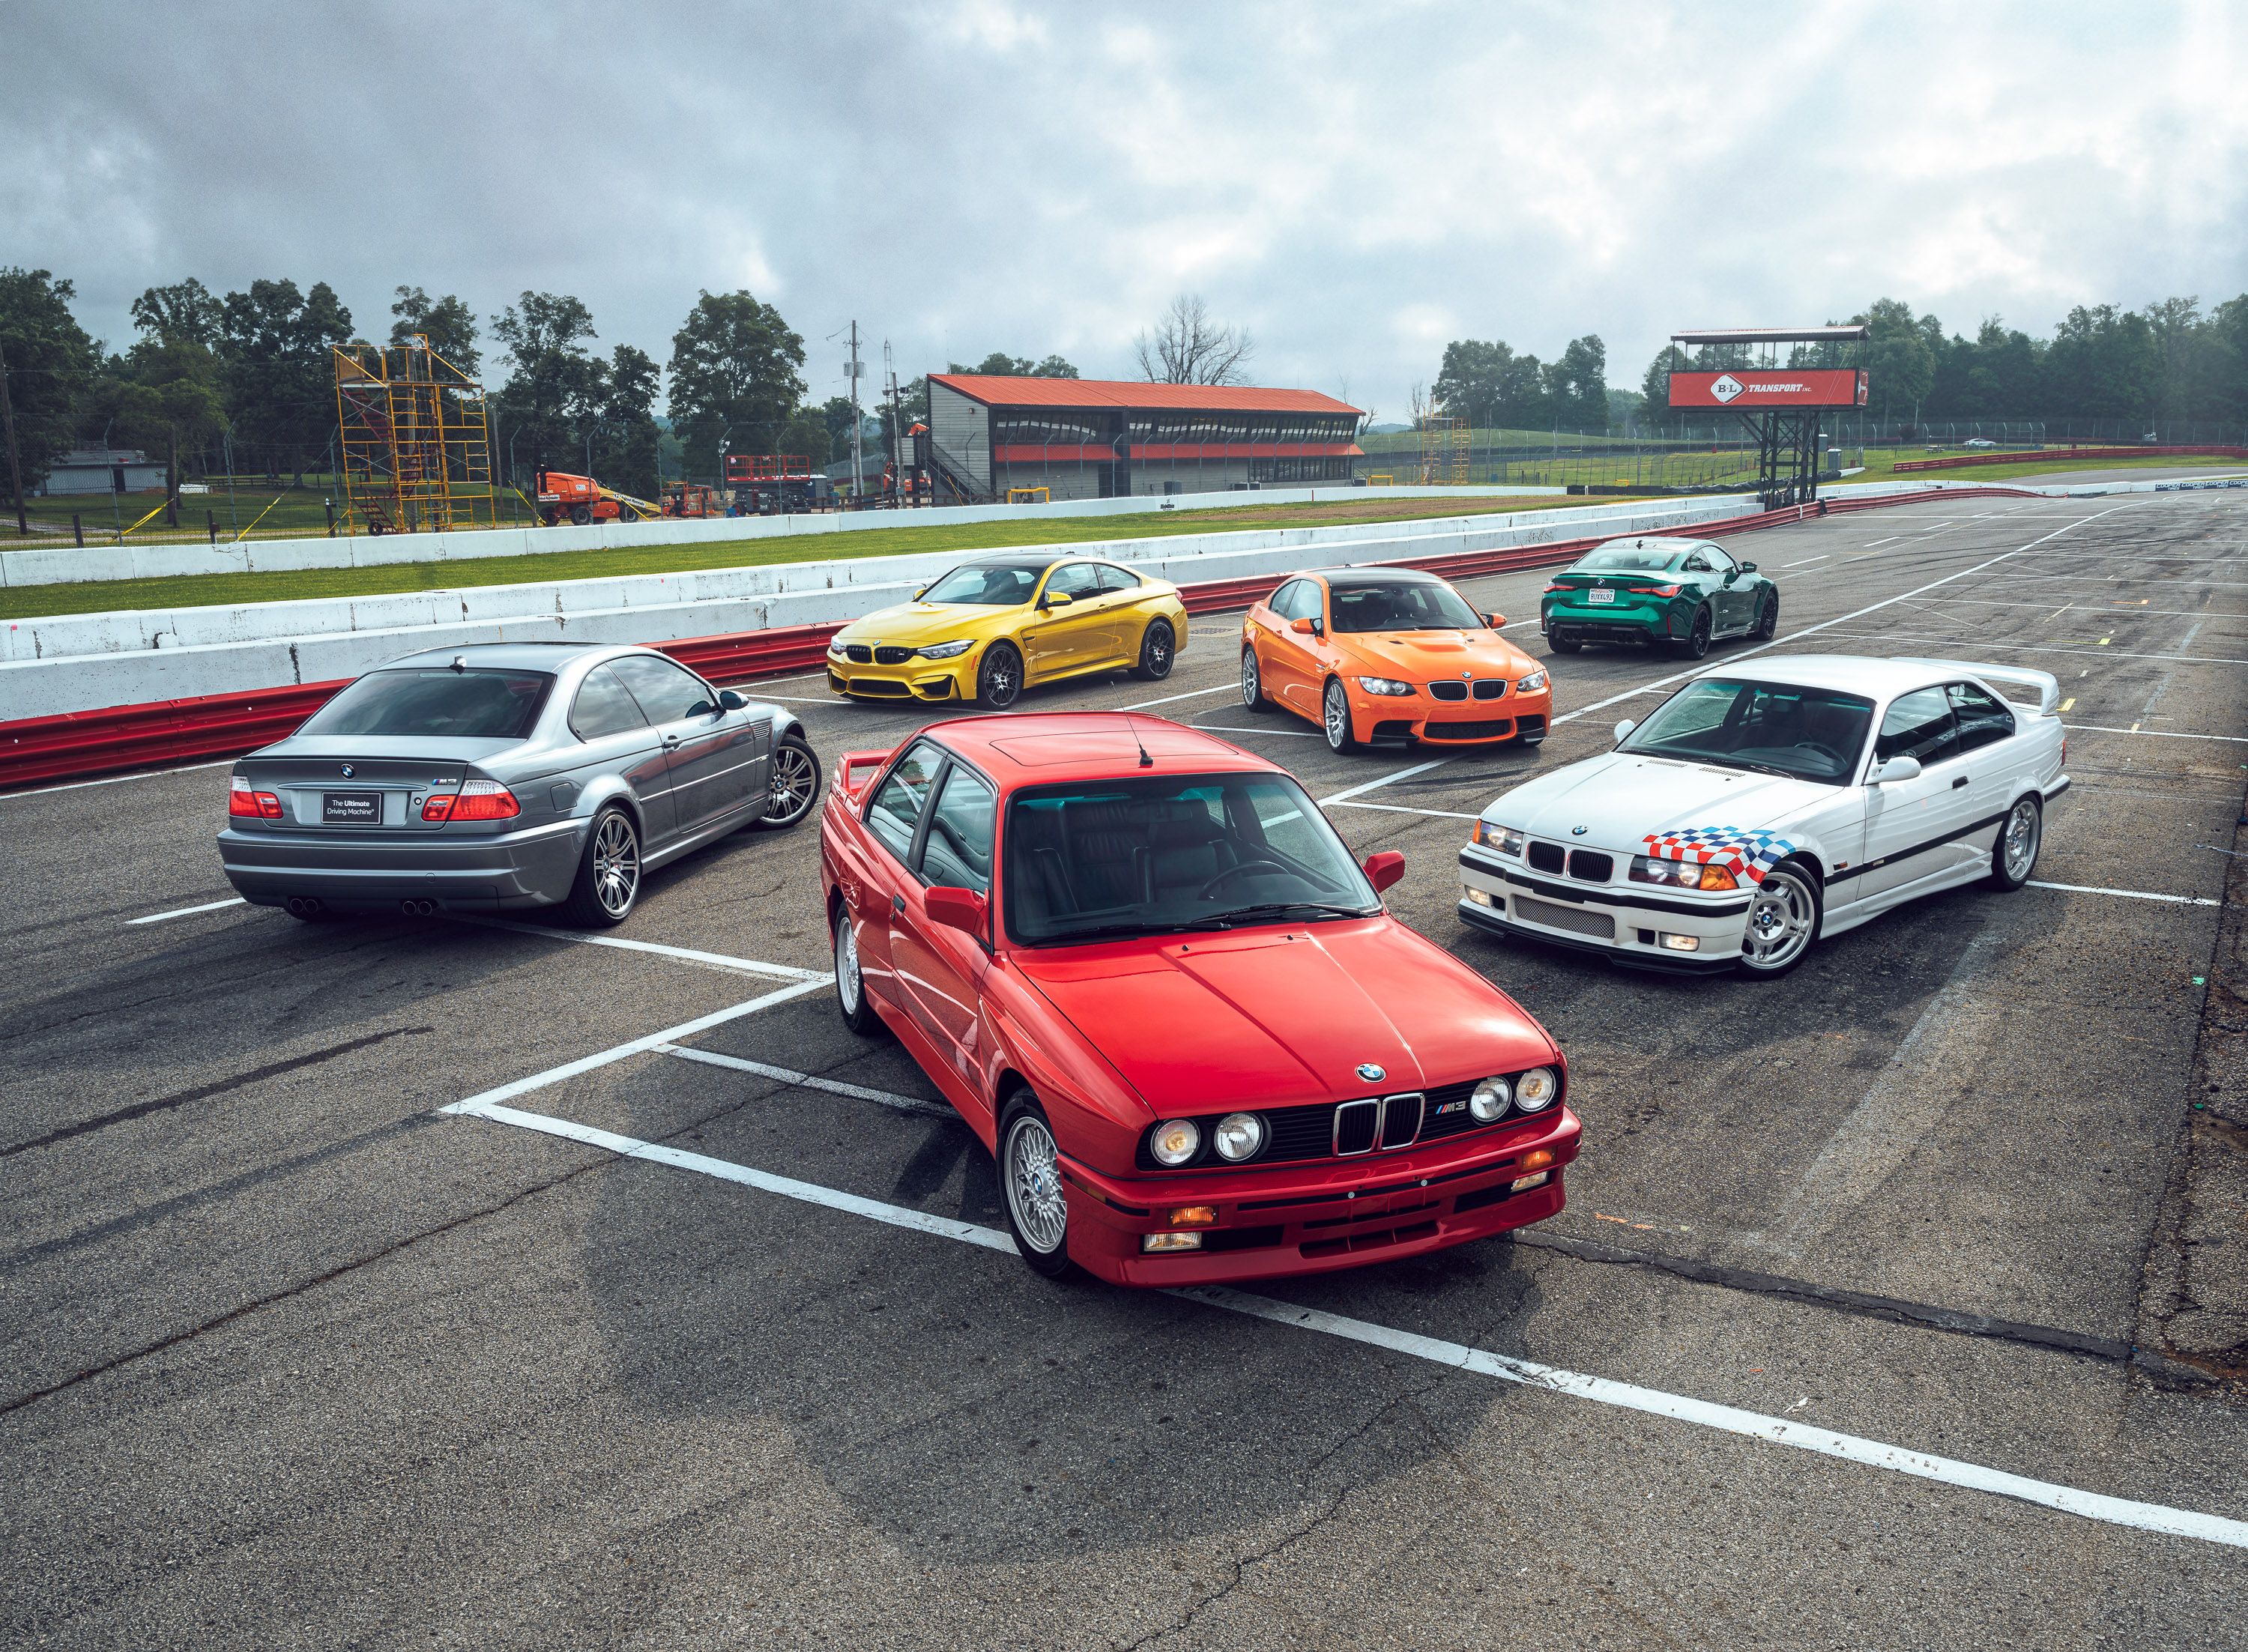 Used buying guide: BMW M3 E30